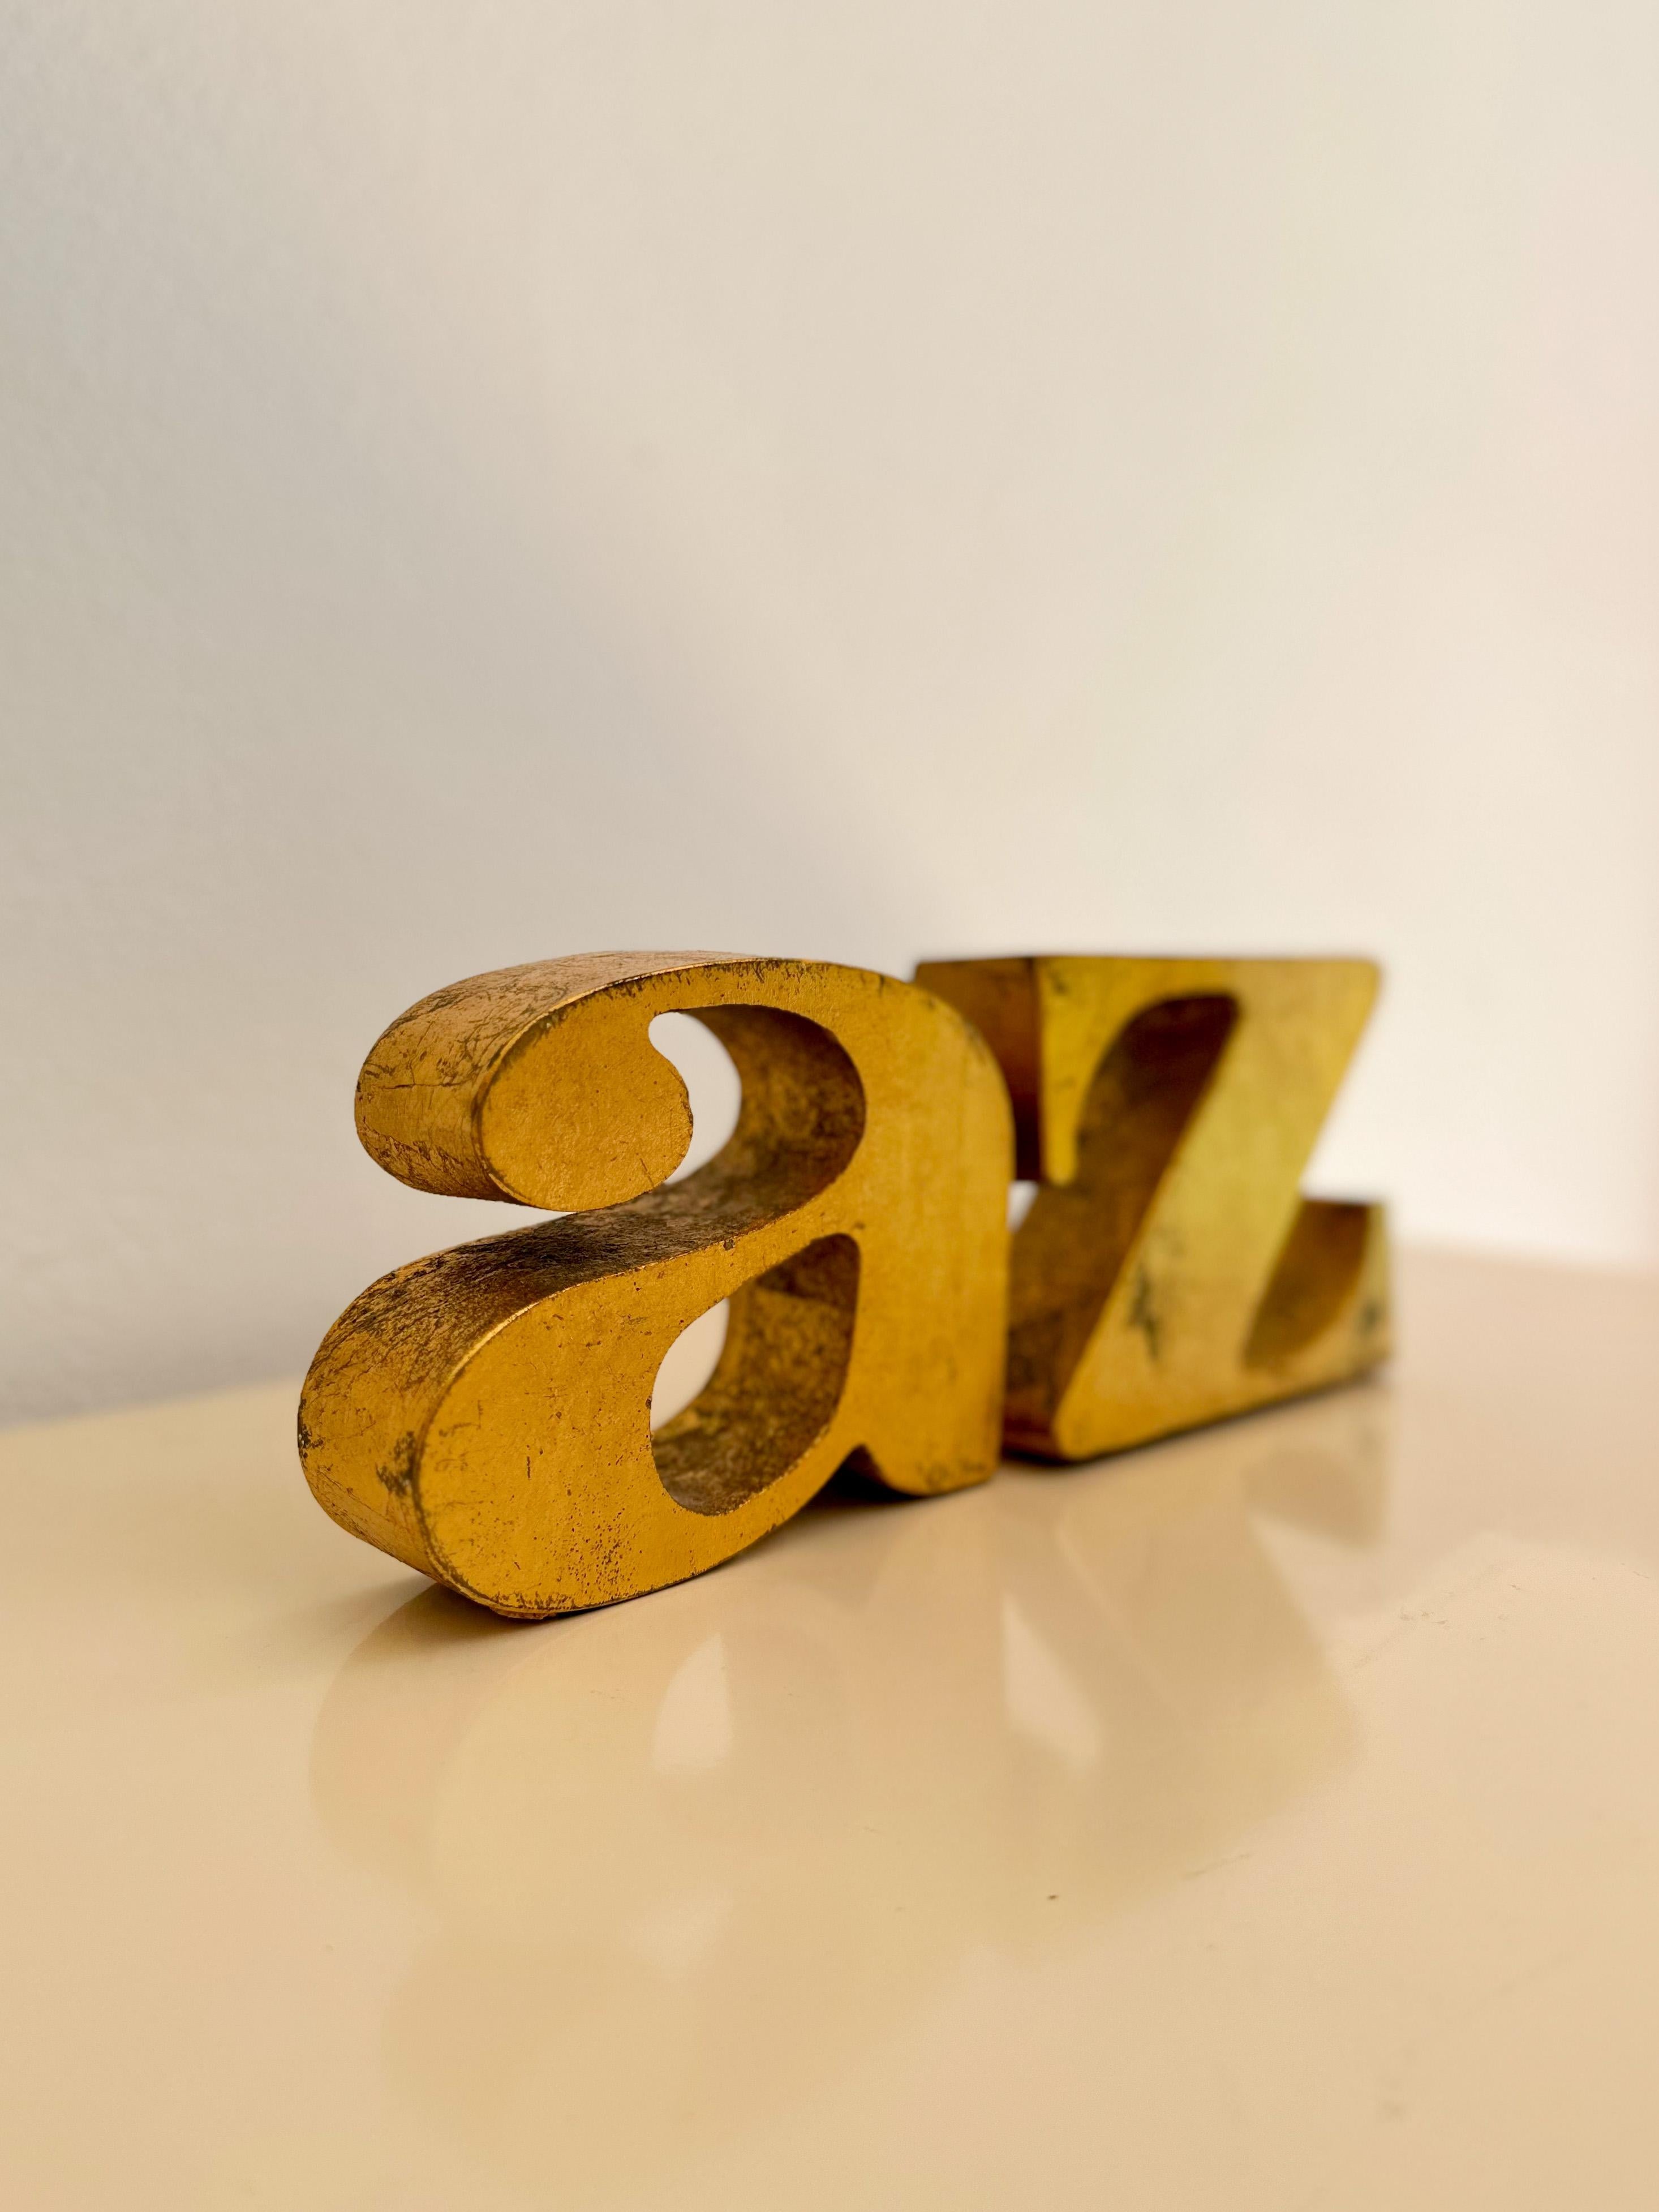 Stately and heavy A-Z cast iron bookend with gilded gold finish by artist Curtis Jeré, c.1960s. These incredible bookends are made of cast iron coated with gold leaf, and weigh in at an astounding 15lbs. Classic serif design is timeless and